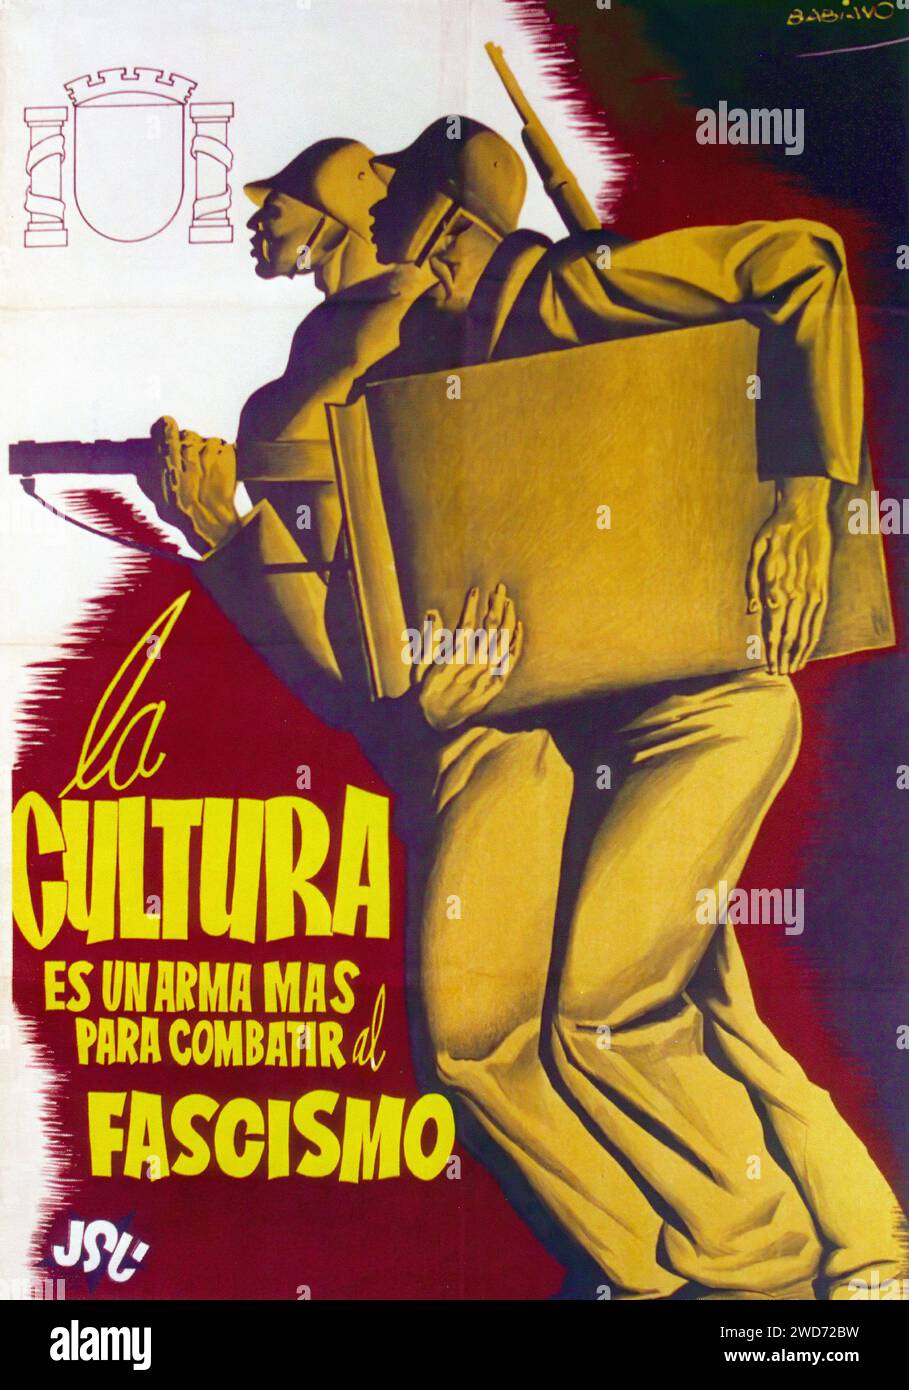 'La cultura es un arma más para combatir al fascismo' 'Culture is a weapon to fight against fascism' The image depicts soldiers carrying books alongside weapons, conveying the message that intellectual and cultural efforts are essential in the fight against fascism. The style is bold and figurative, with solid colors and strong lines. - Spanish Civil War (Guerra Civil Española) Propaganda Poster Stock Photo